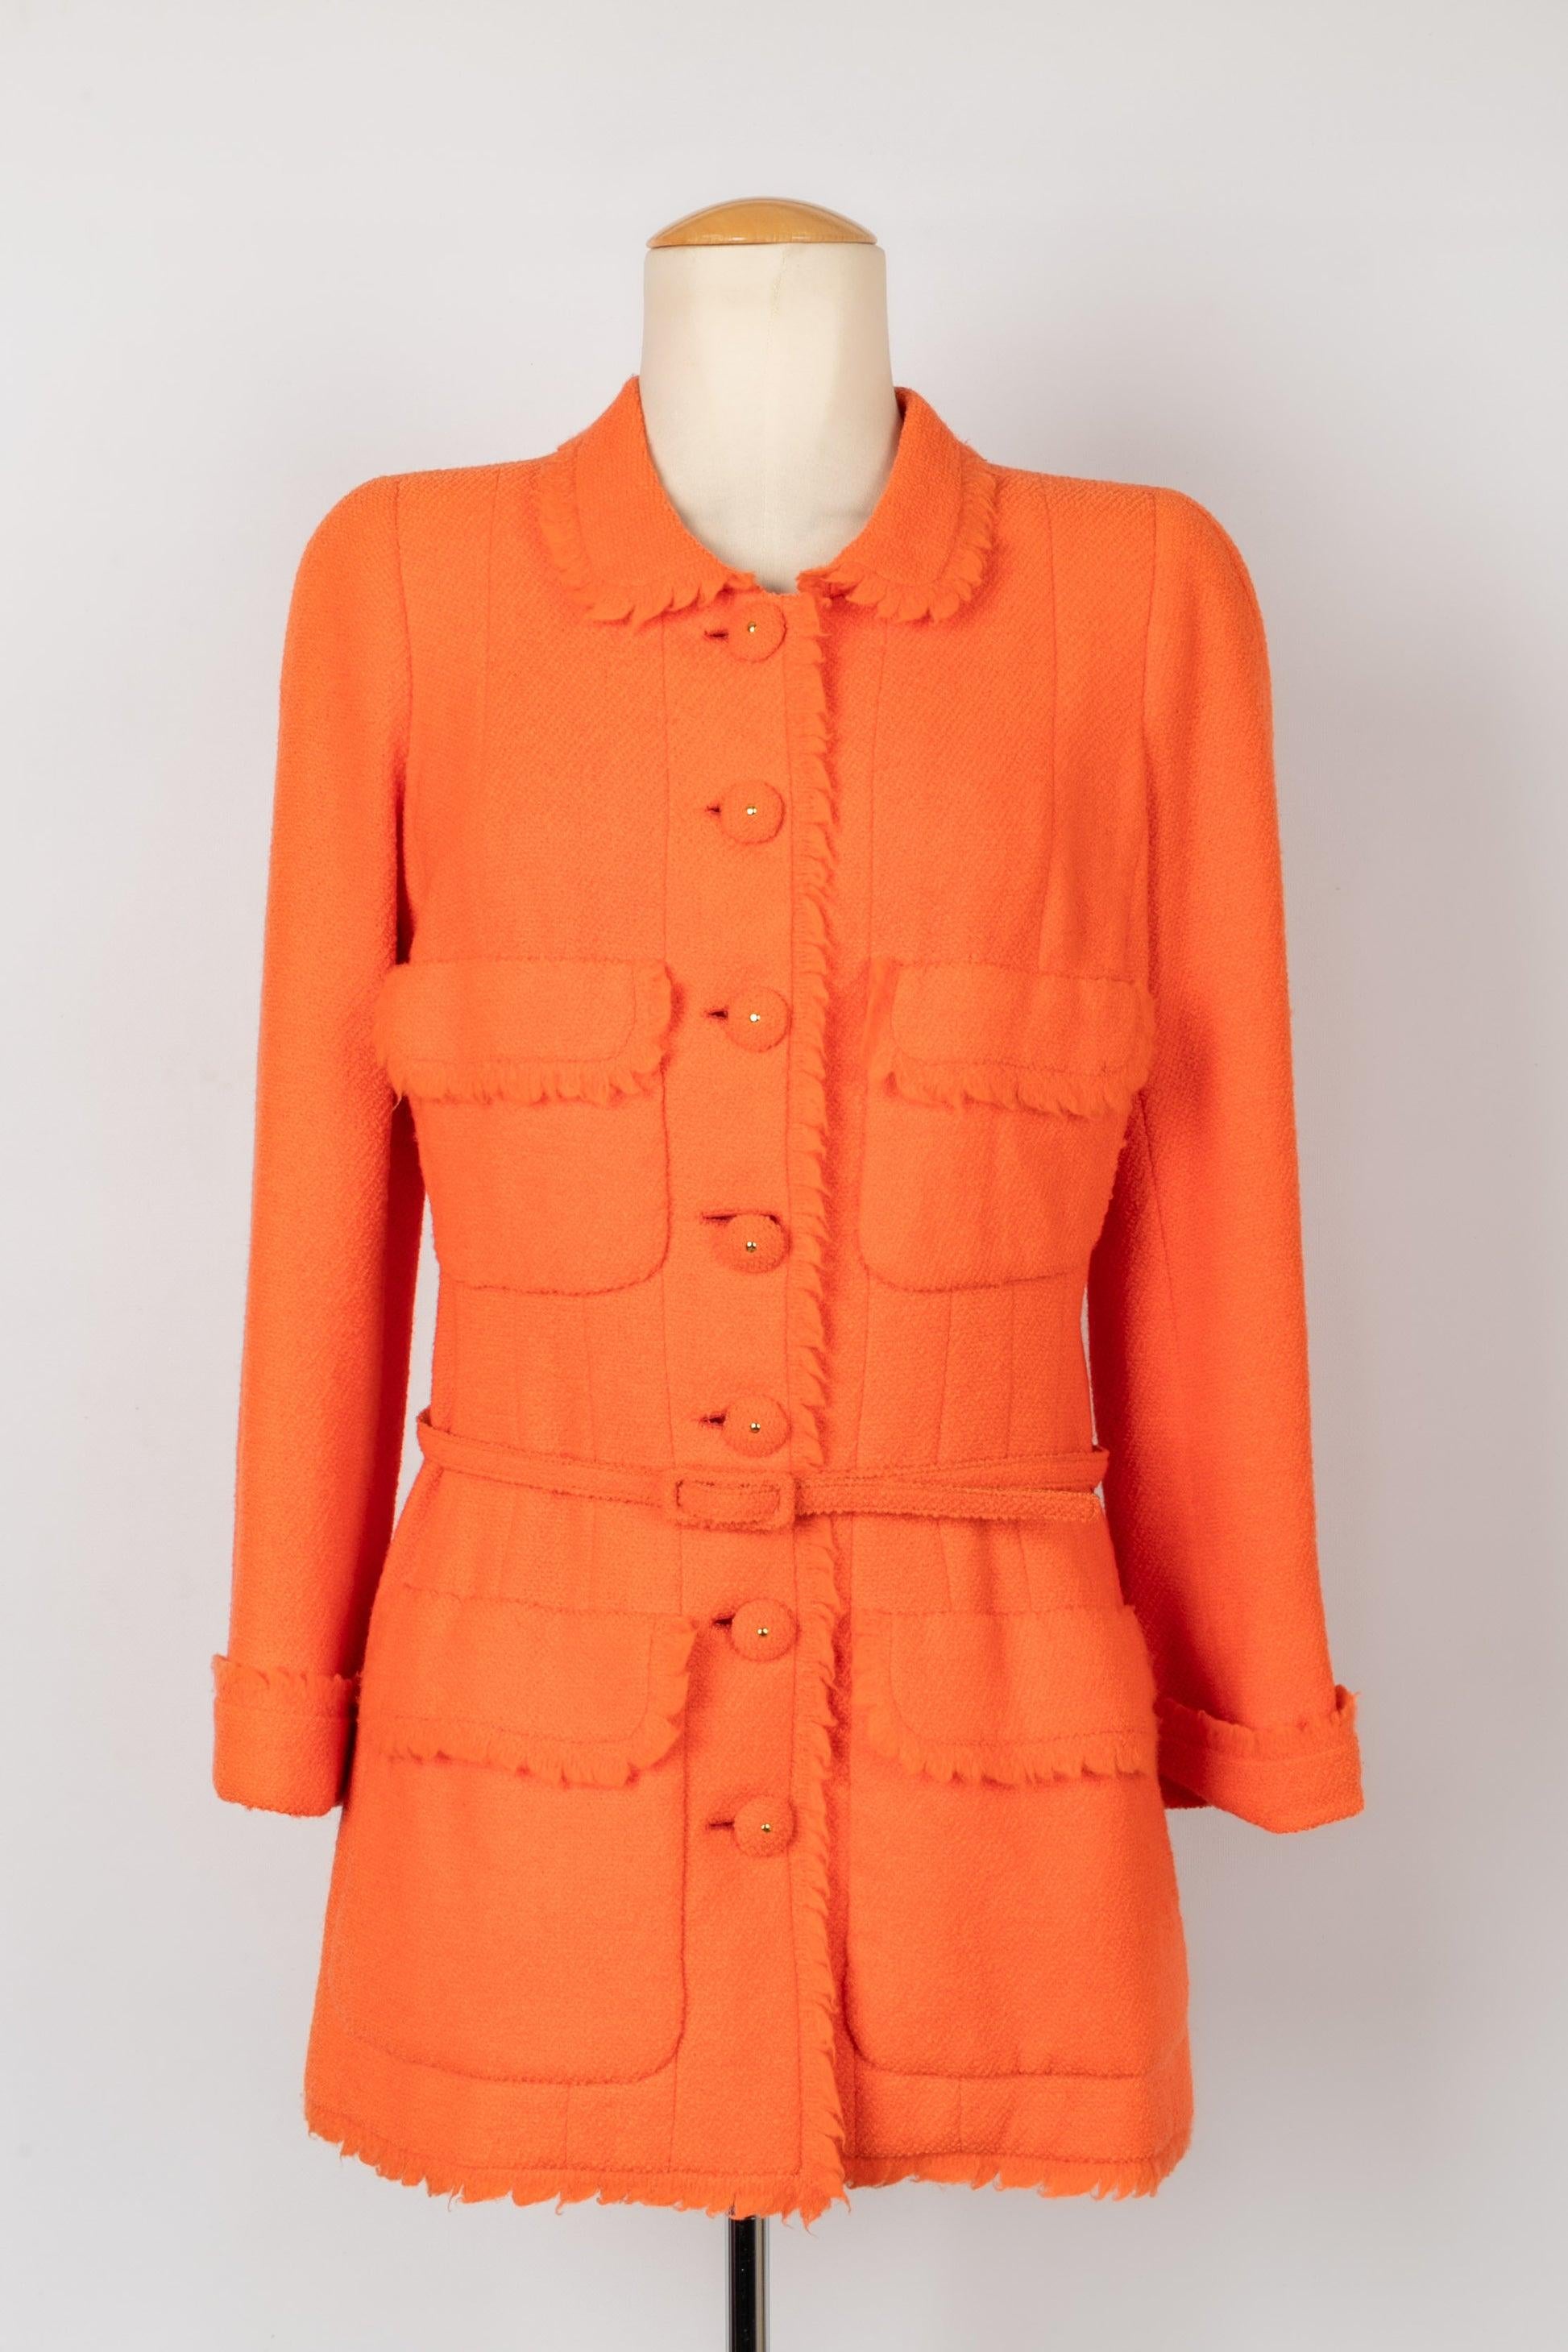 Chanel Suit of Jacket and Skirt Haute Couture, 1995 For Sale 1